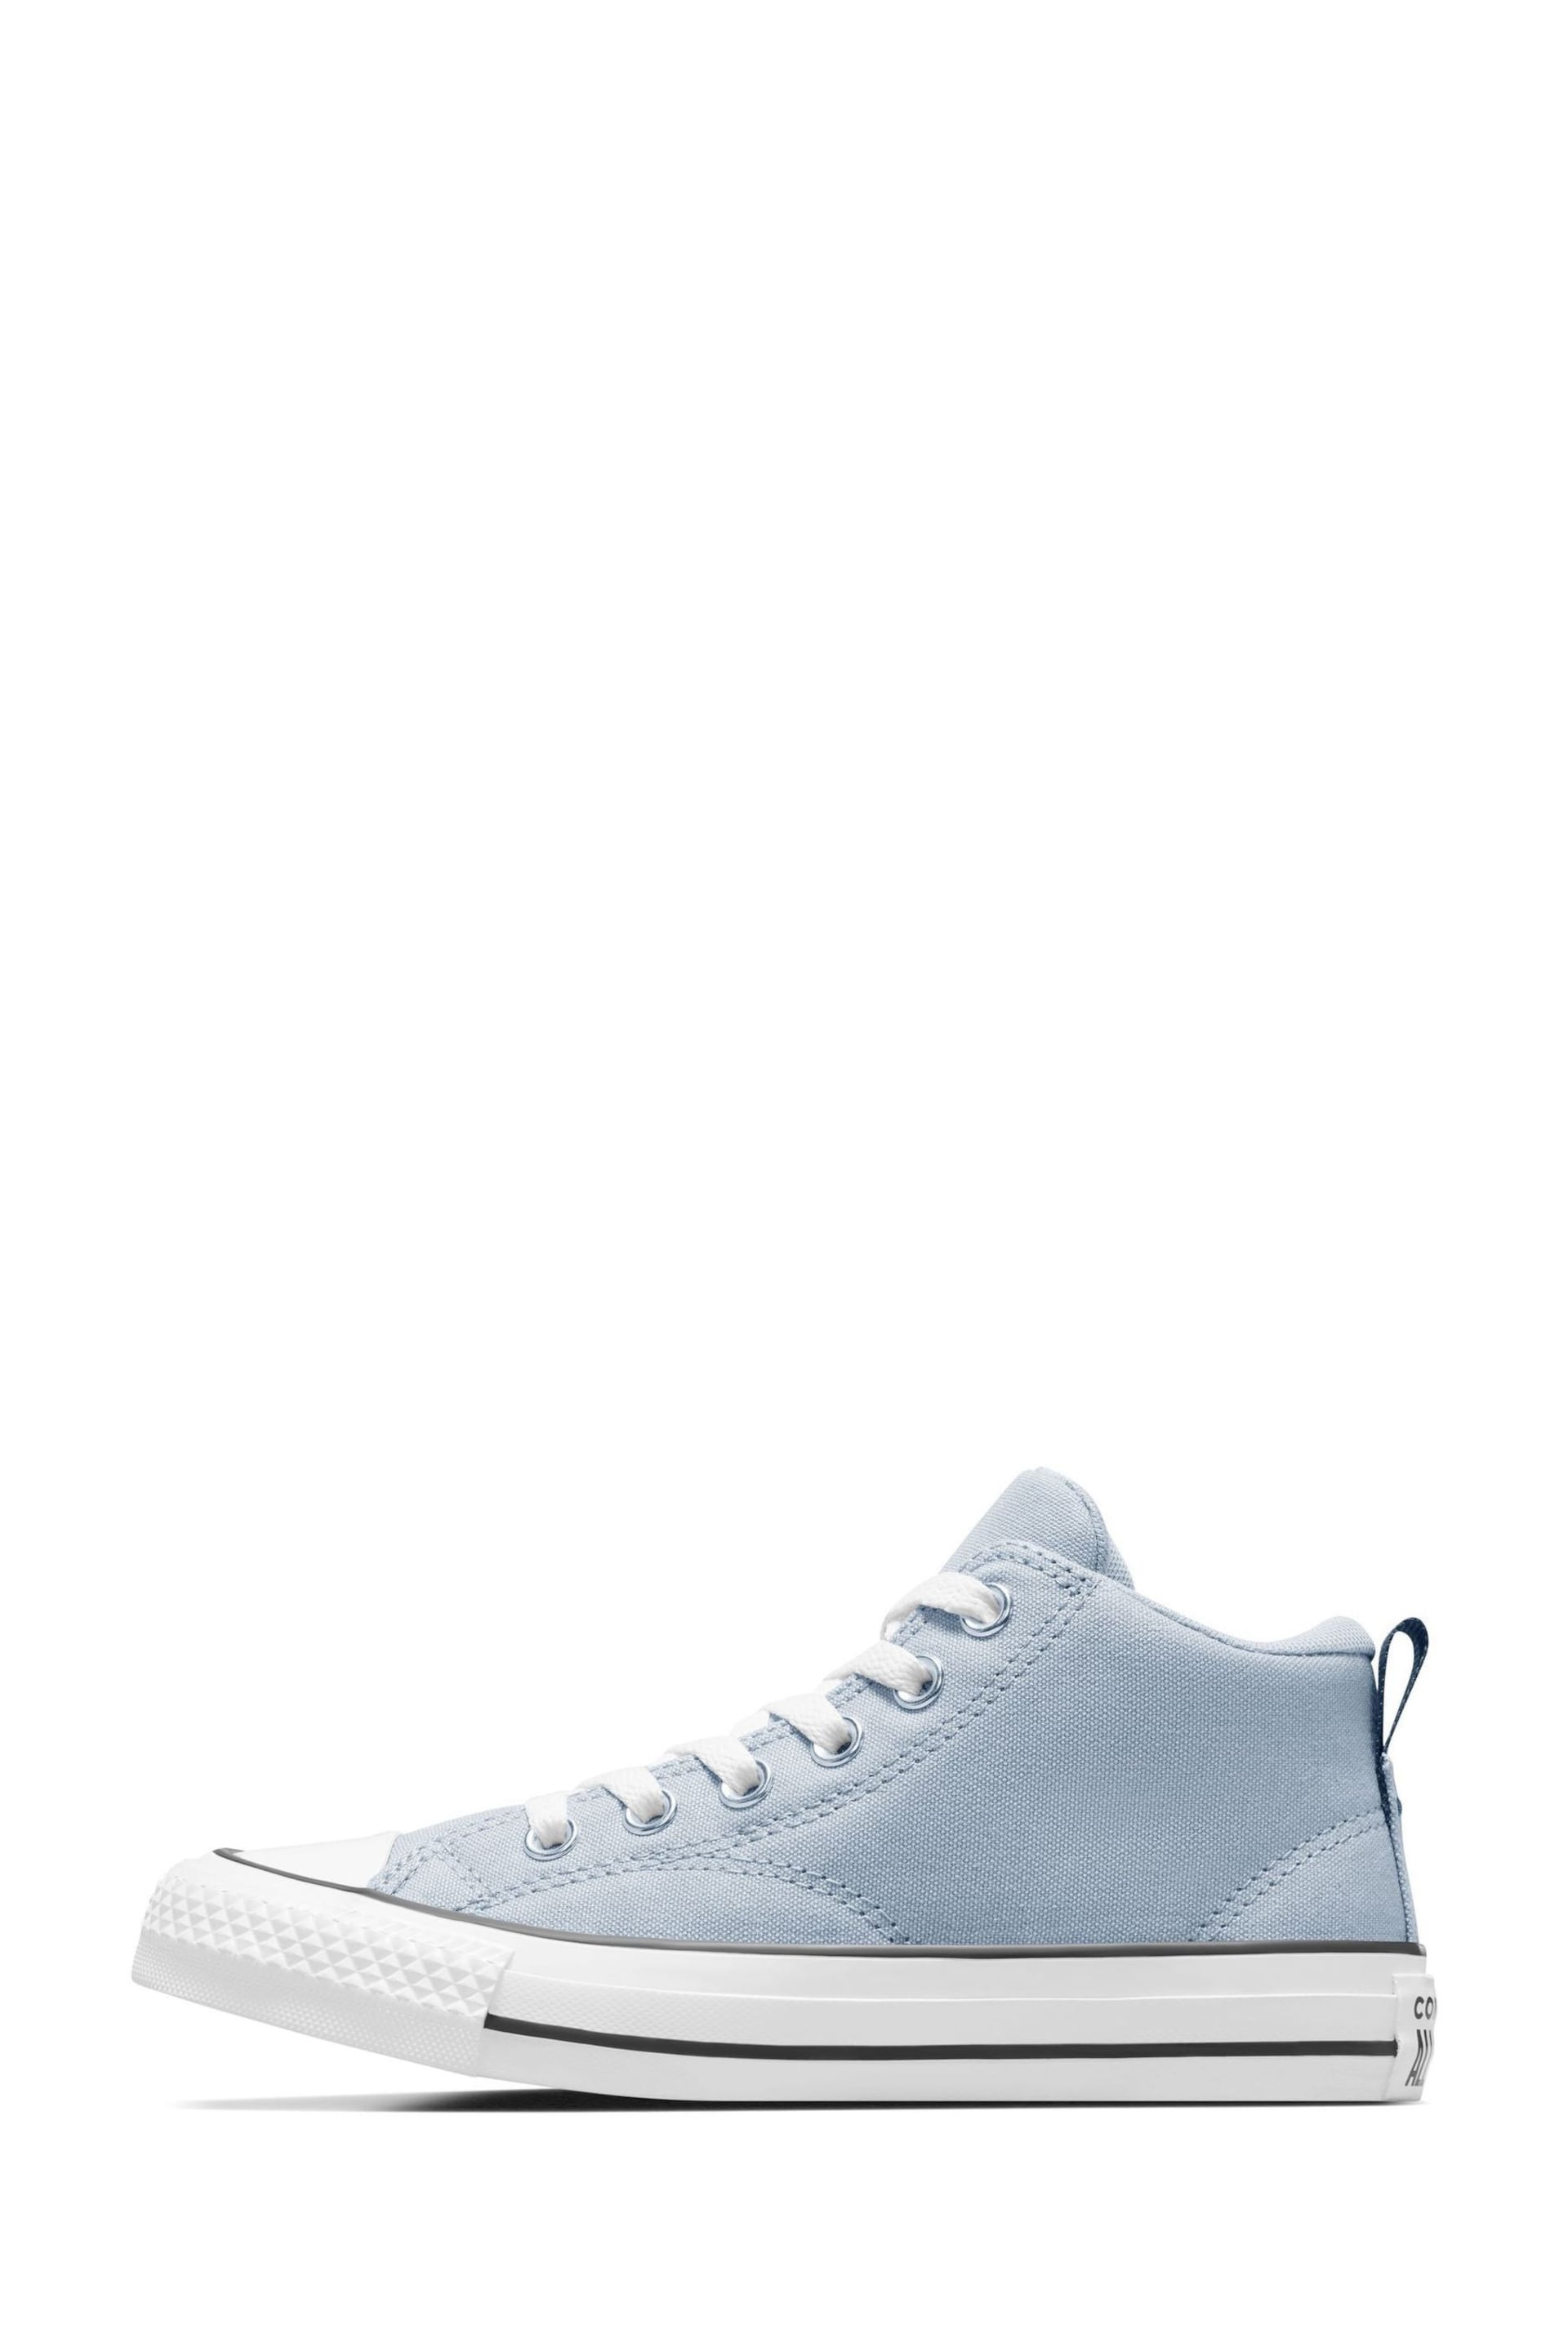 Converse Navy Malden Street Youth Trainers - Image 3 of 8